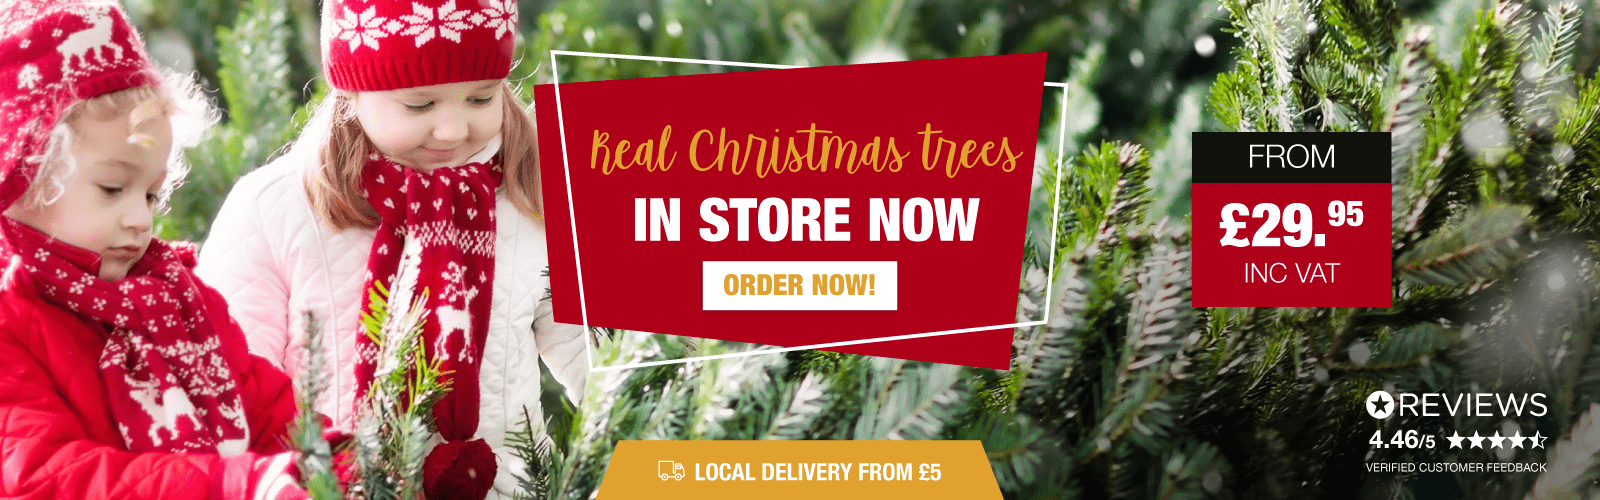 Real Christmas Trees In Store Order Now